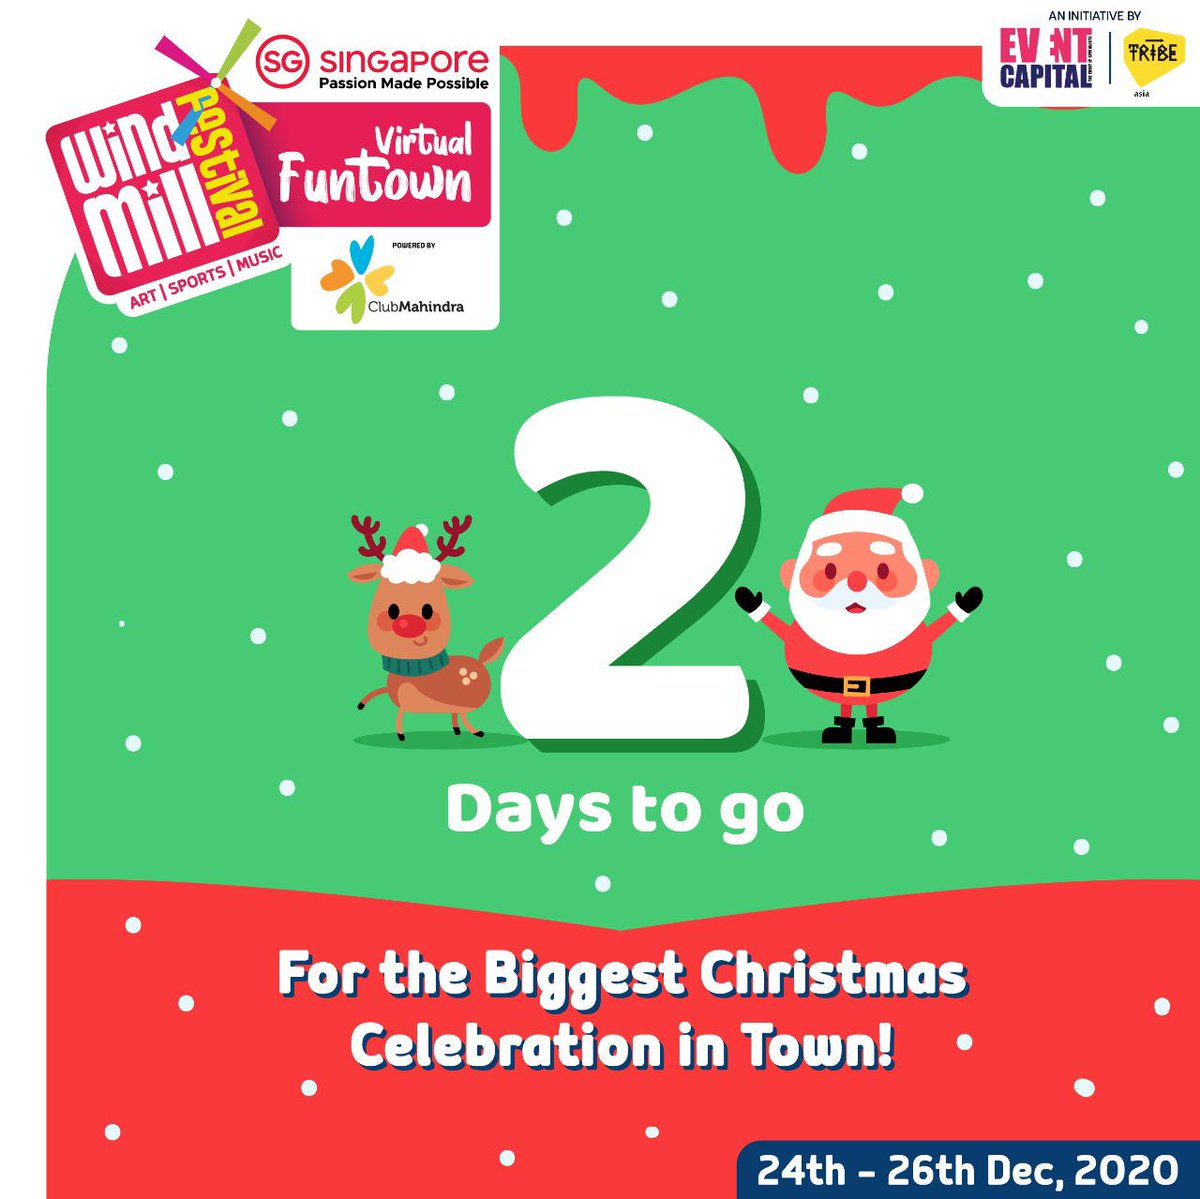 Are you ready for a fun Christmas celebration? 2 days to go!!! Register Now for the Windmill Festival Virtual Funtown - Christmas Edition. virtualfuntown.live @Event_Capital #windmillfest #letswindmill #windmillchristmas #windmill2020